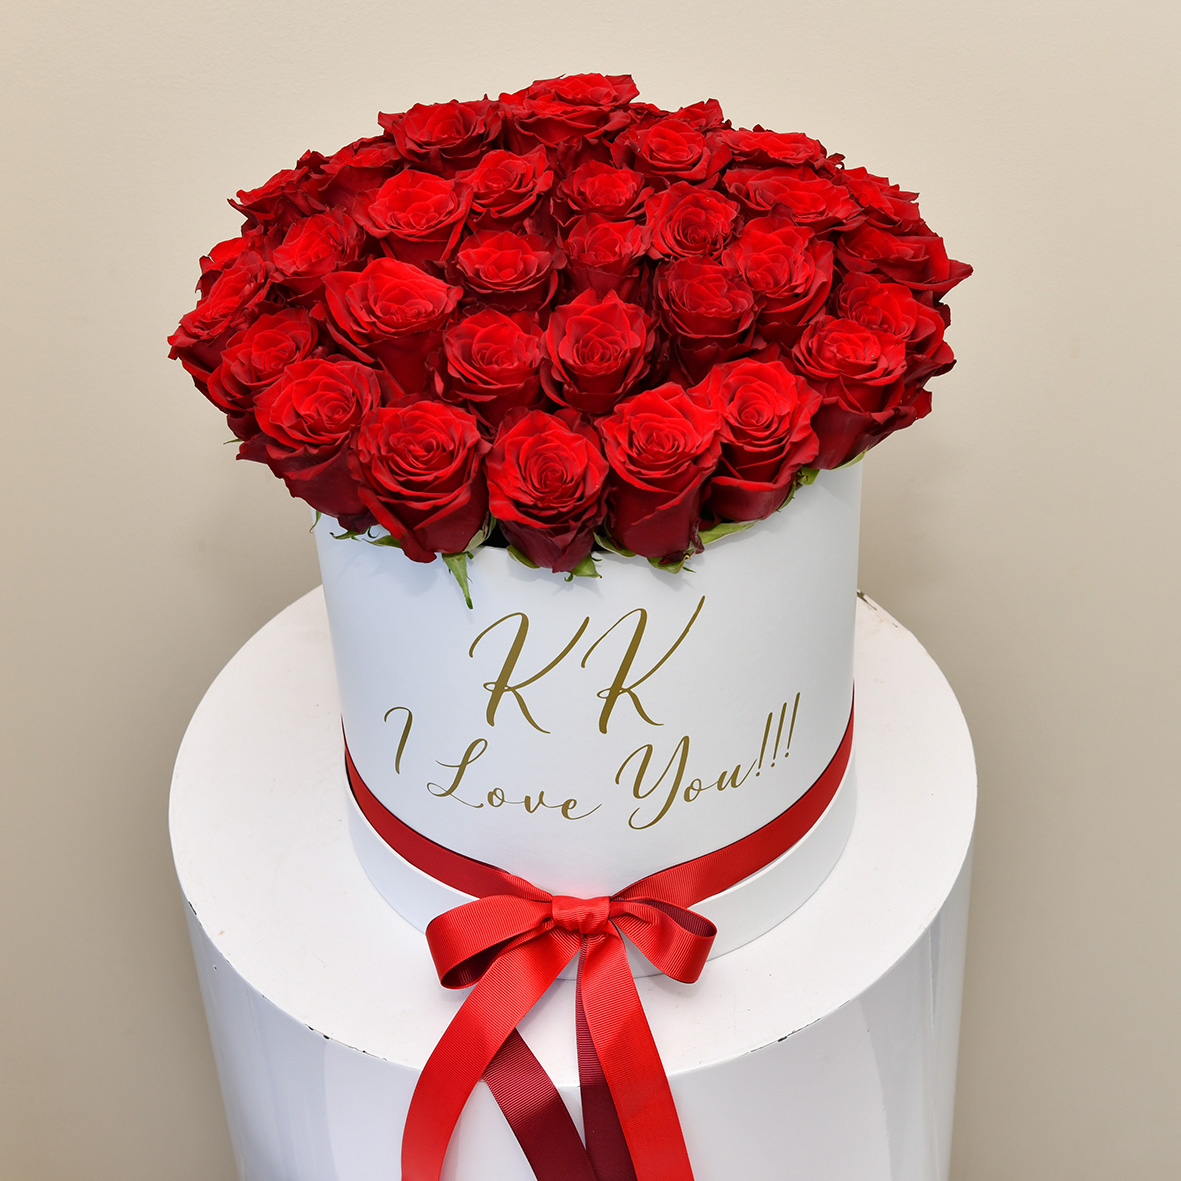 Shop for Valentine's Day flowers delivered in Sydney CBD. Surprise your sweetheart with a bouquet of fresh blooms. Order now for fast and reliable delivery!